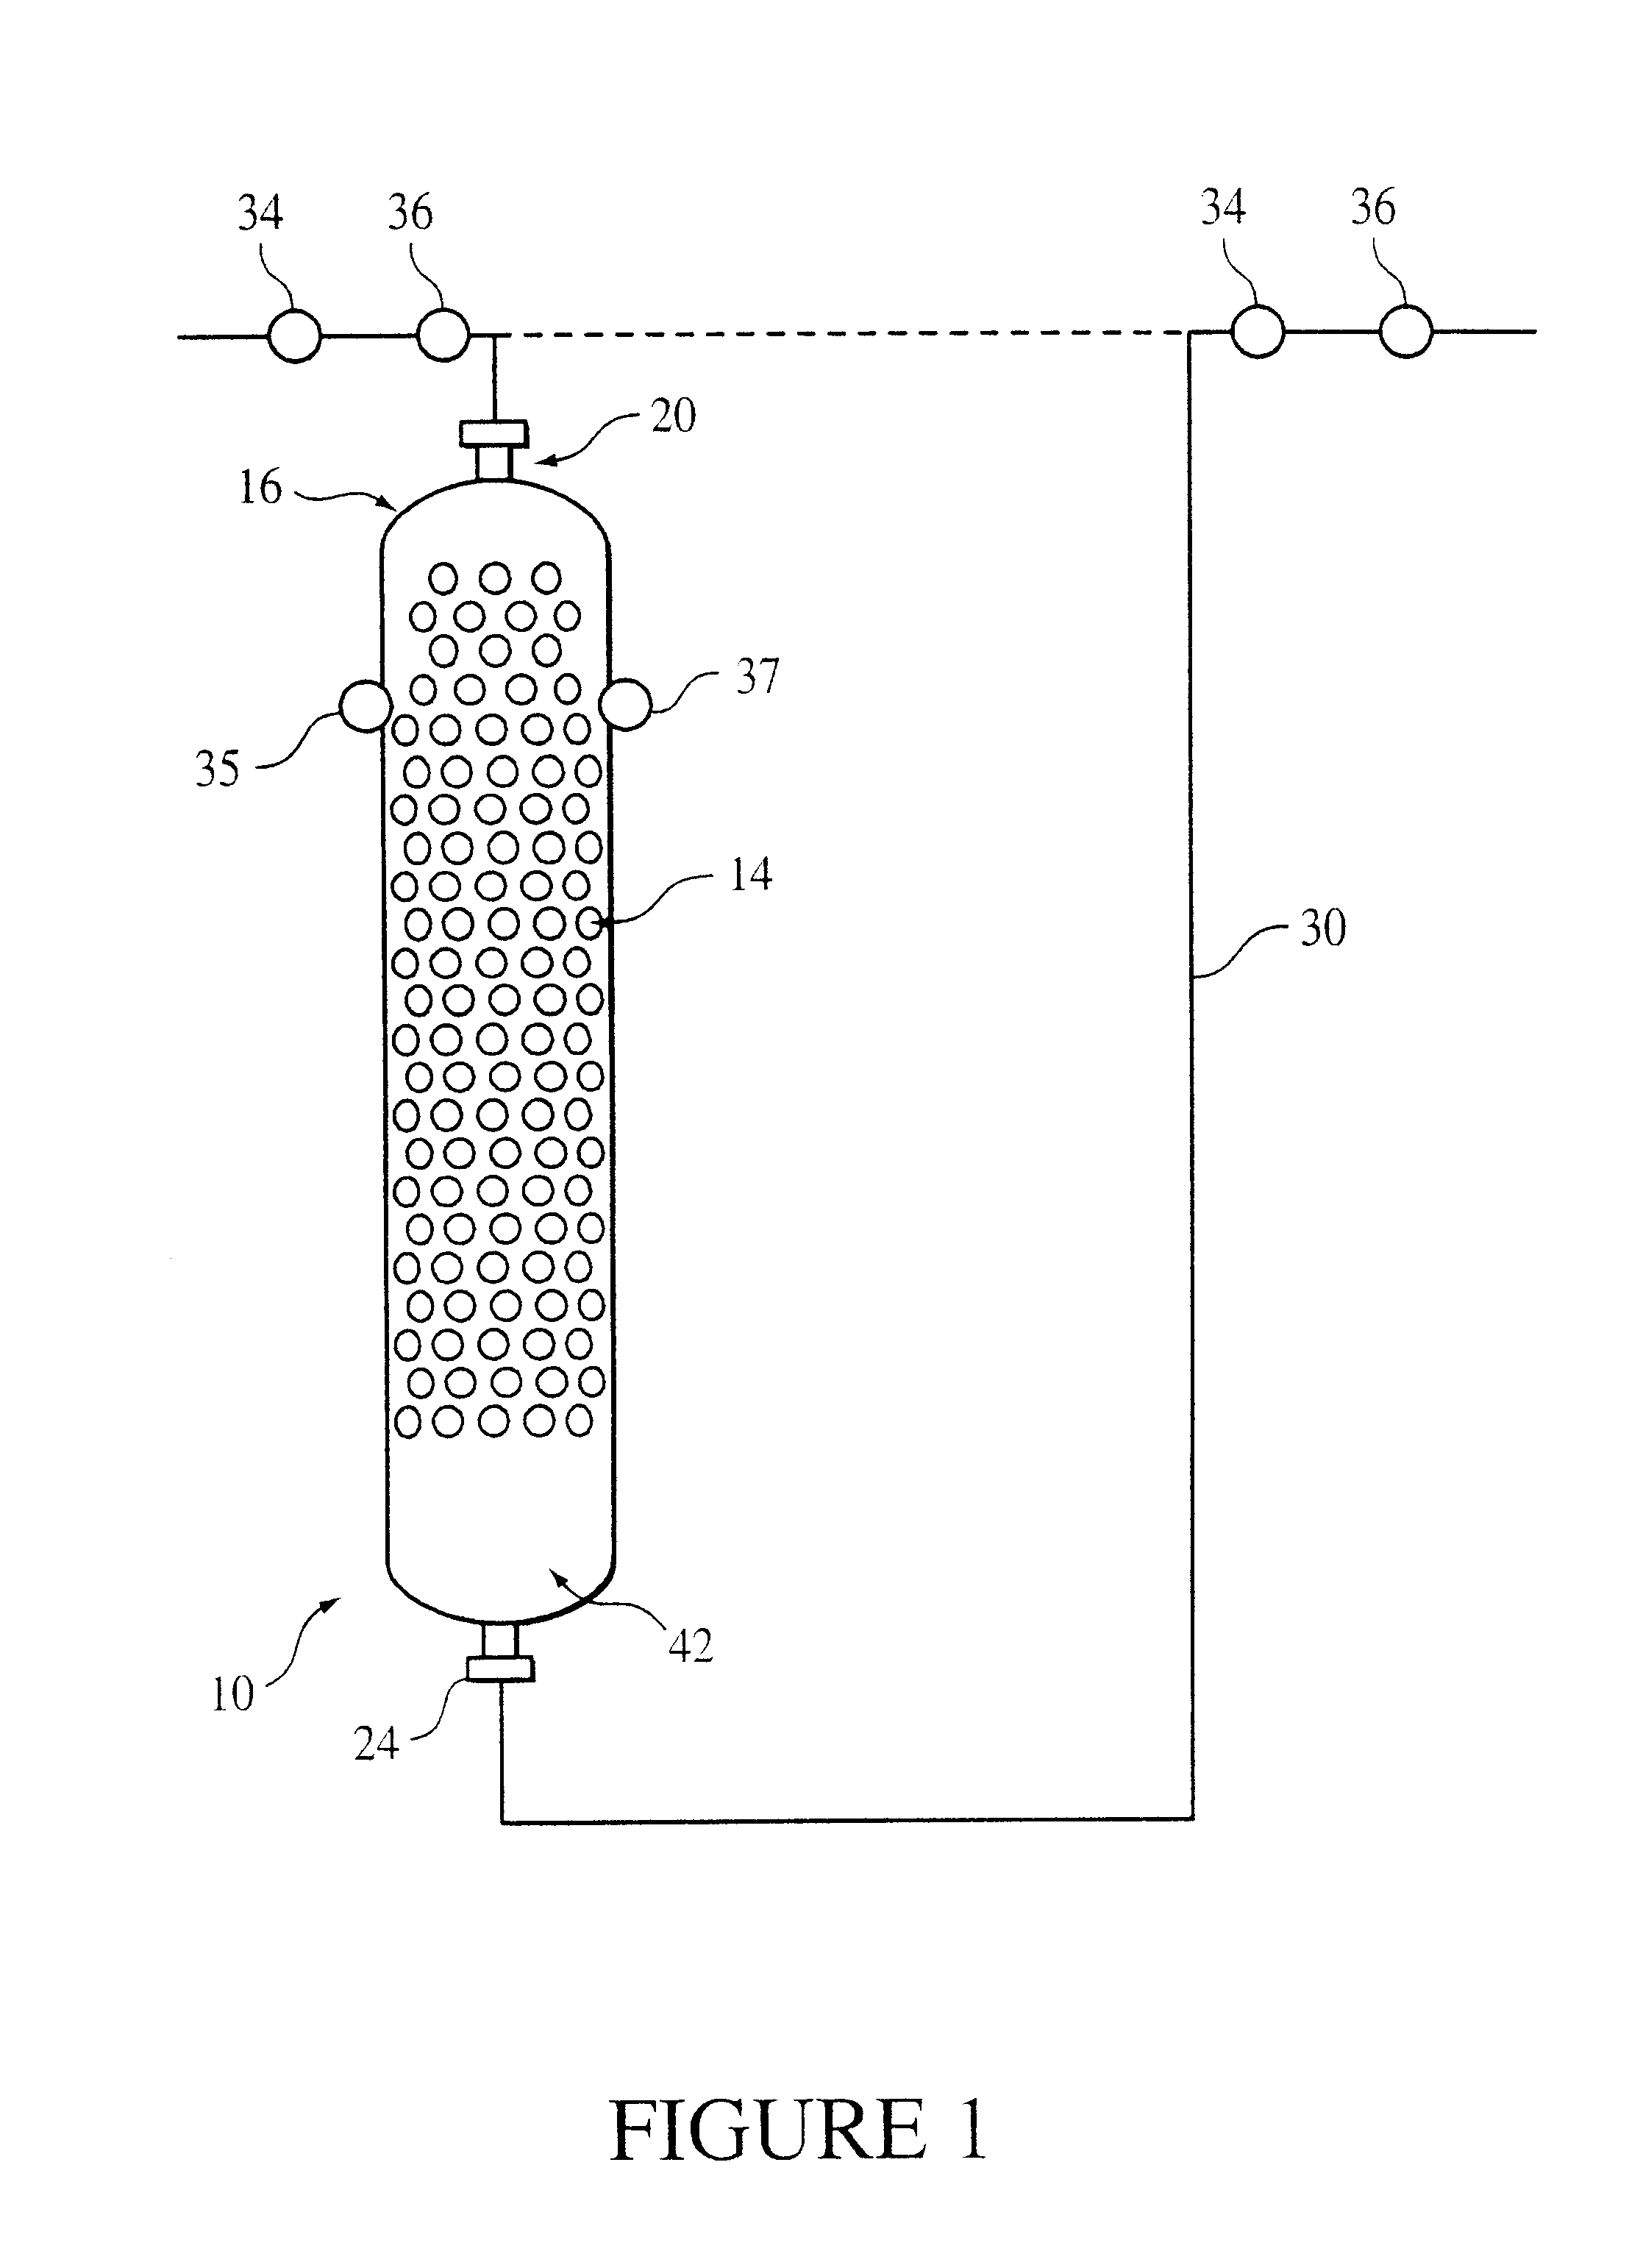 Chemical reactor system and process